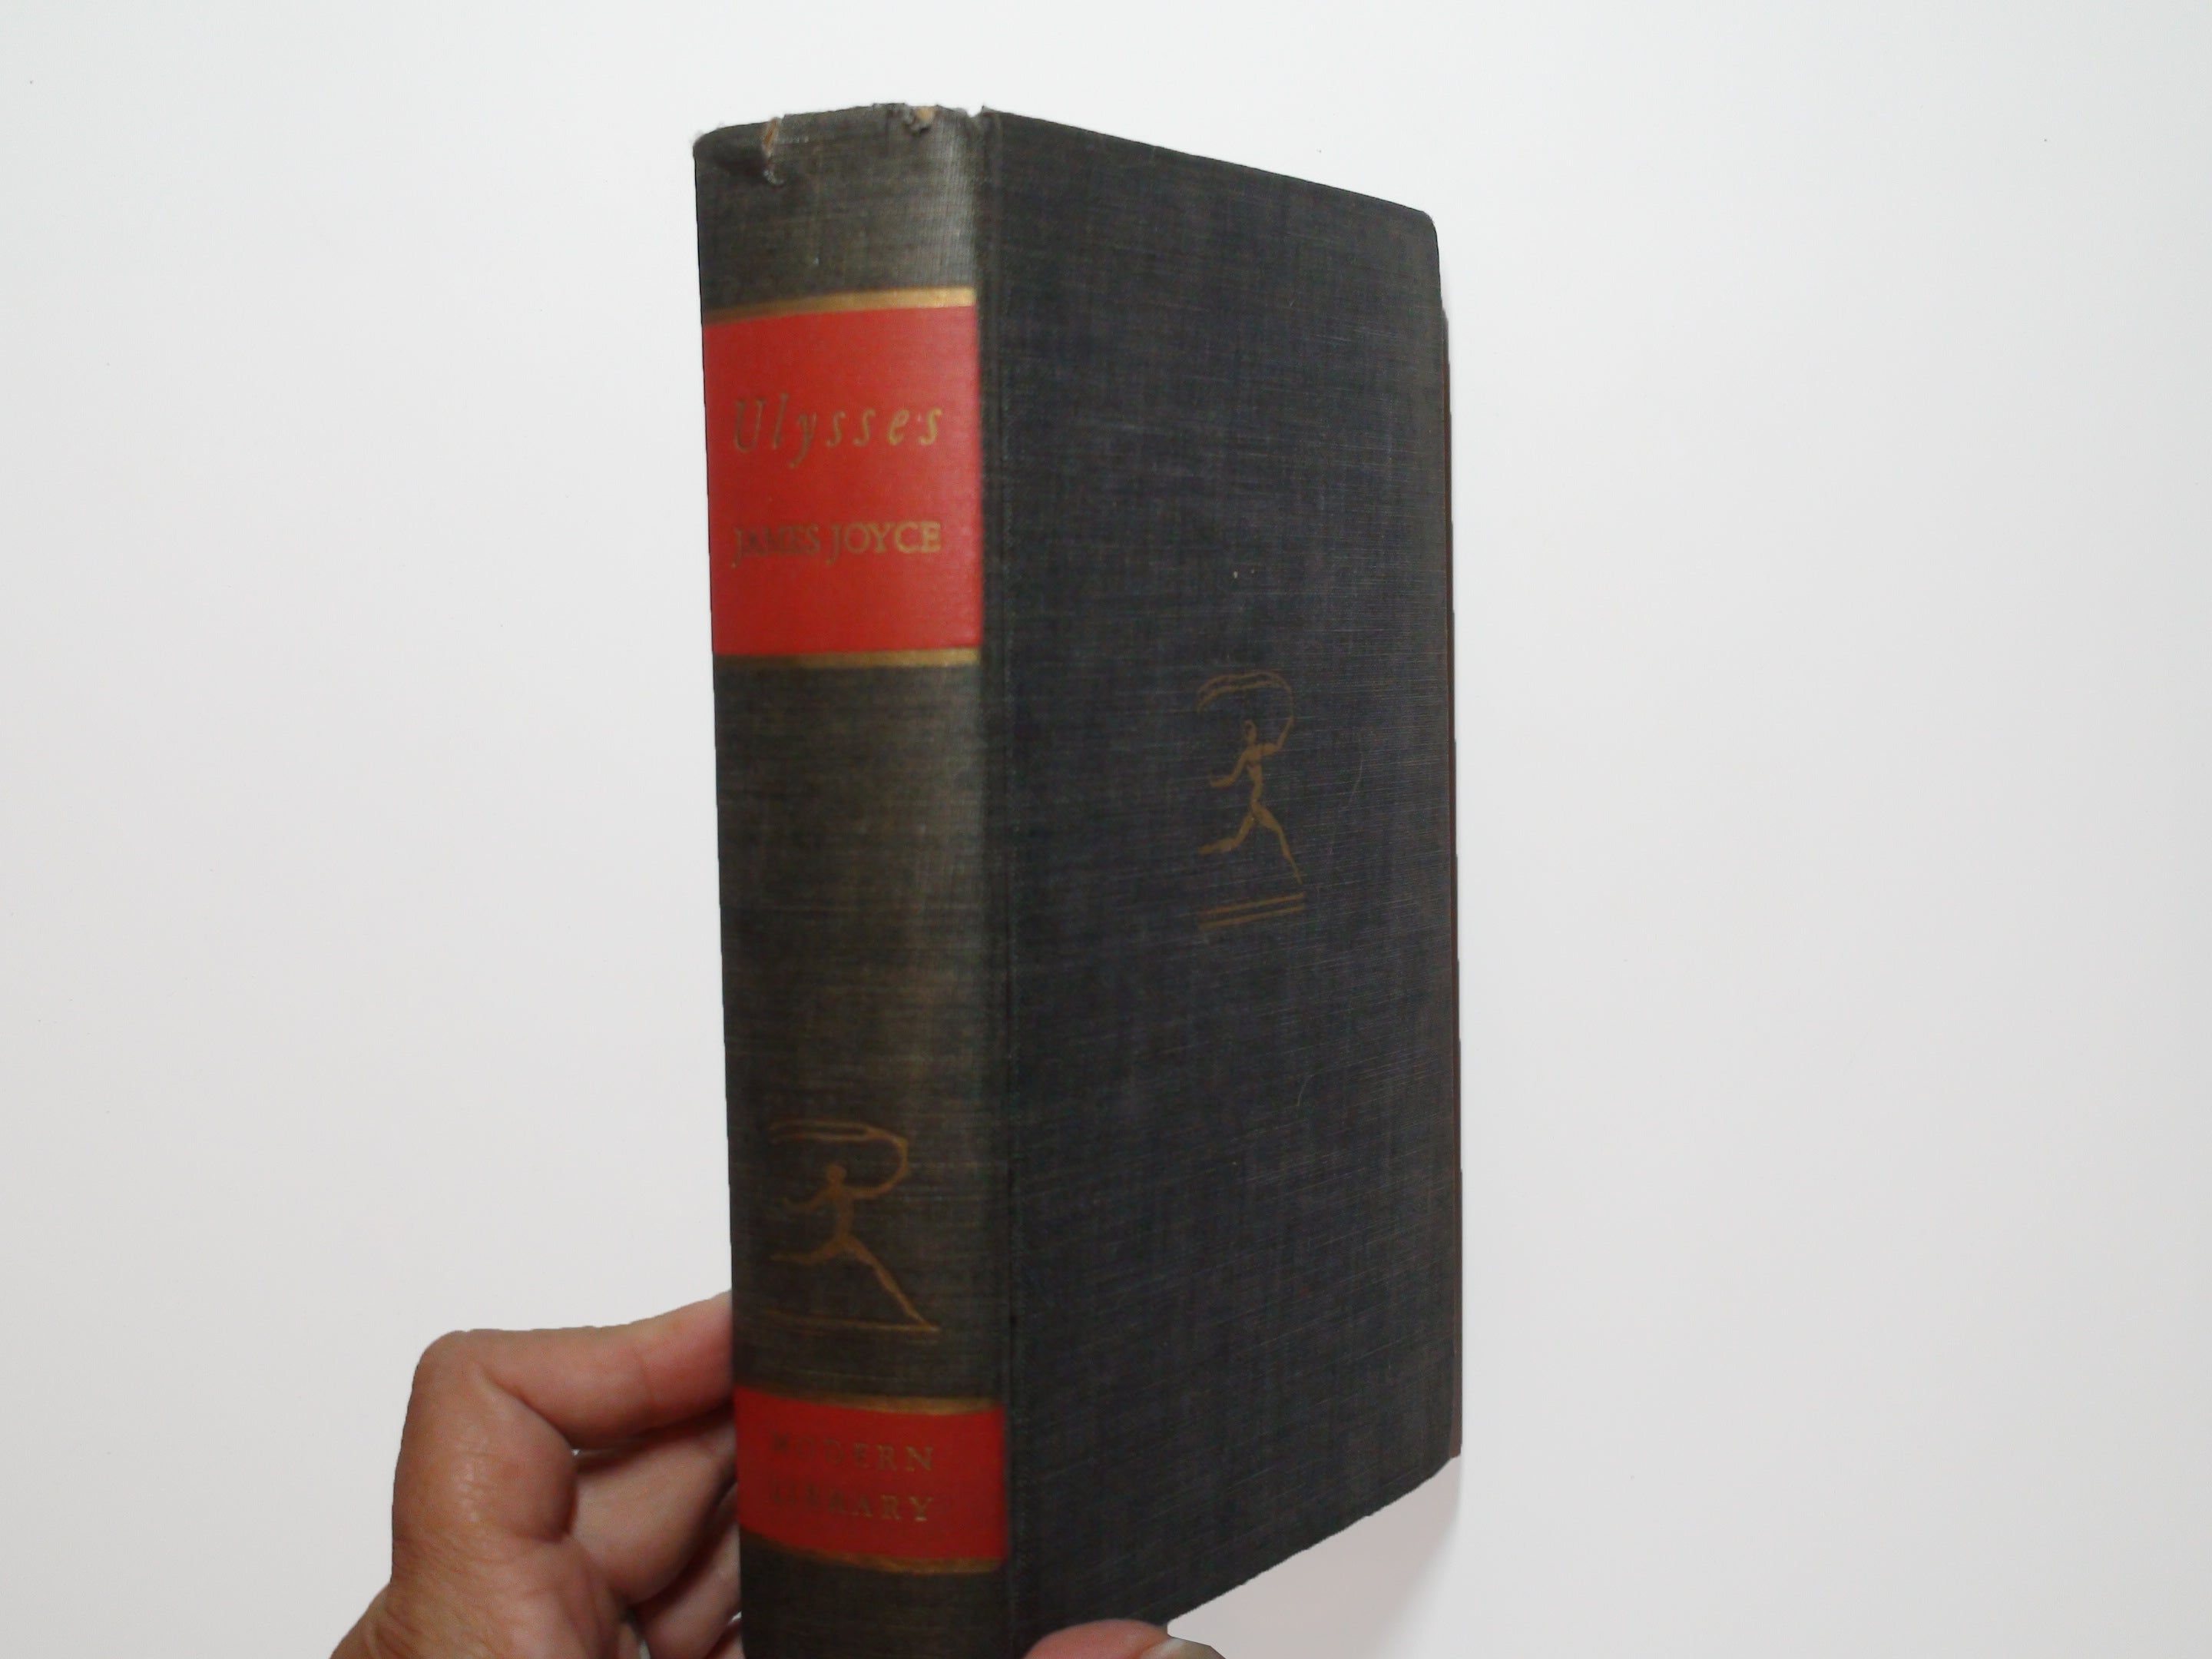 Ulysses by James Joyce, First Authorized American Edition, no D/J, 1934